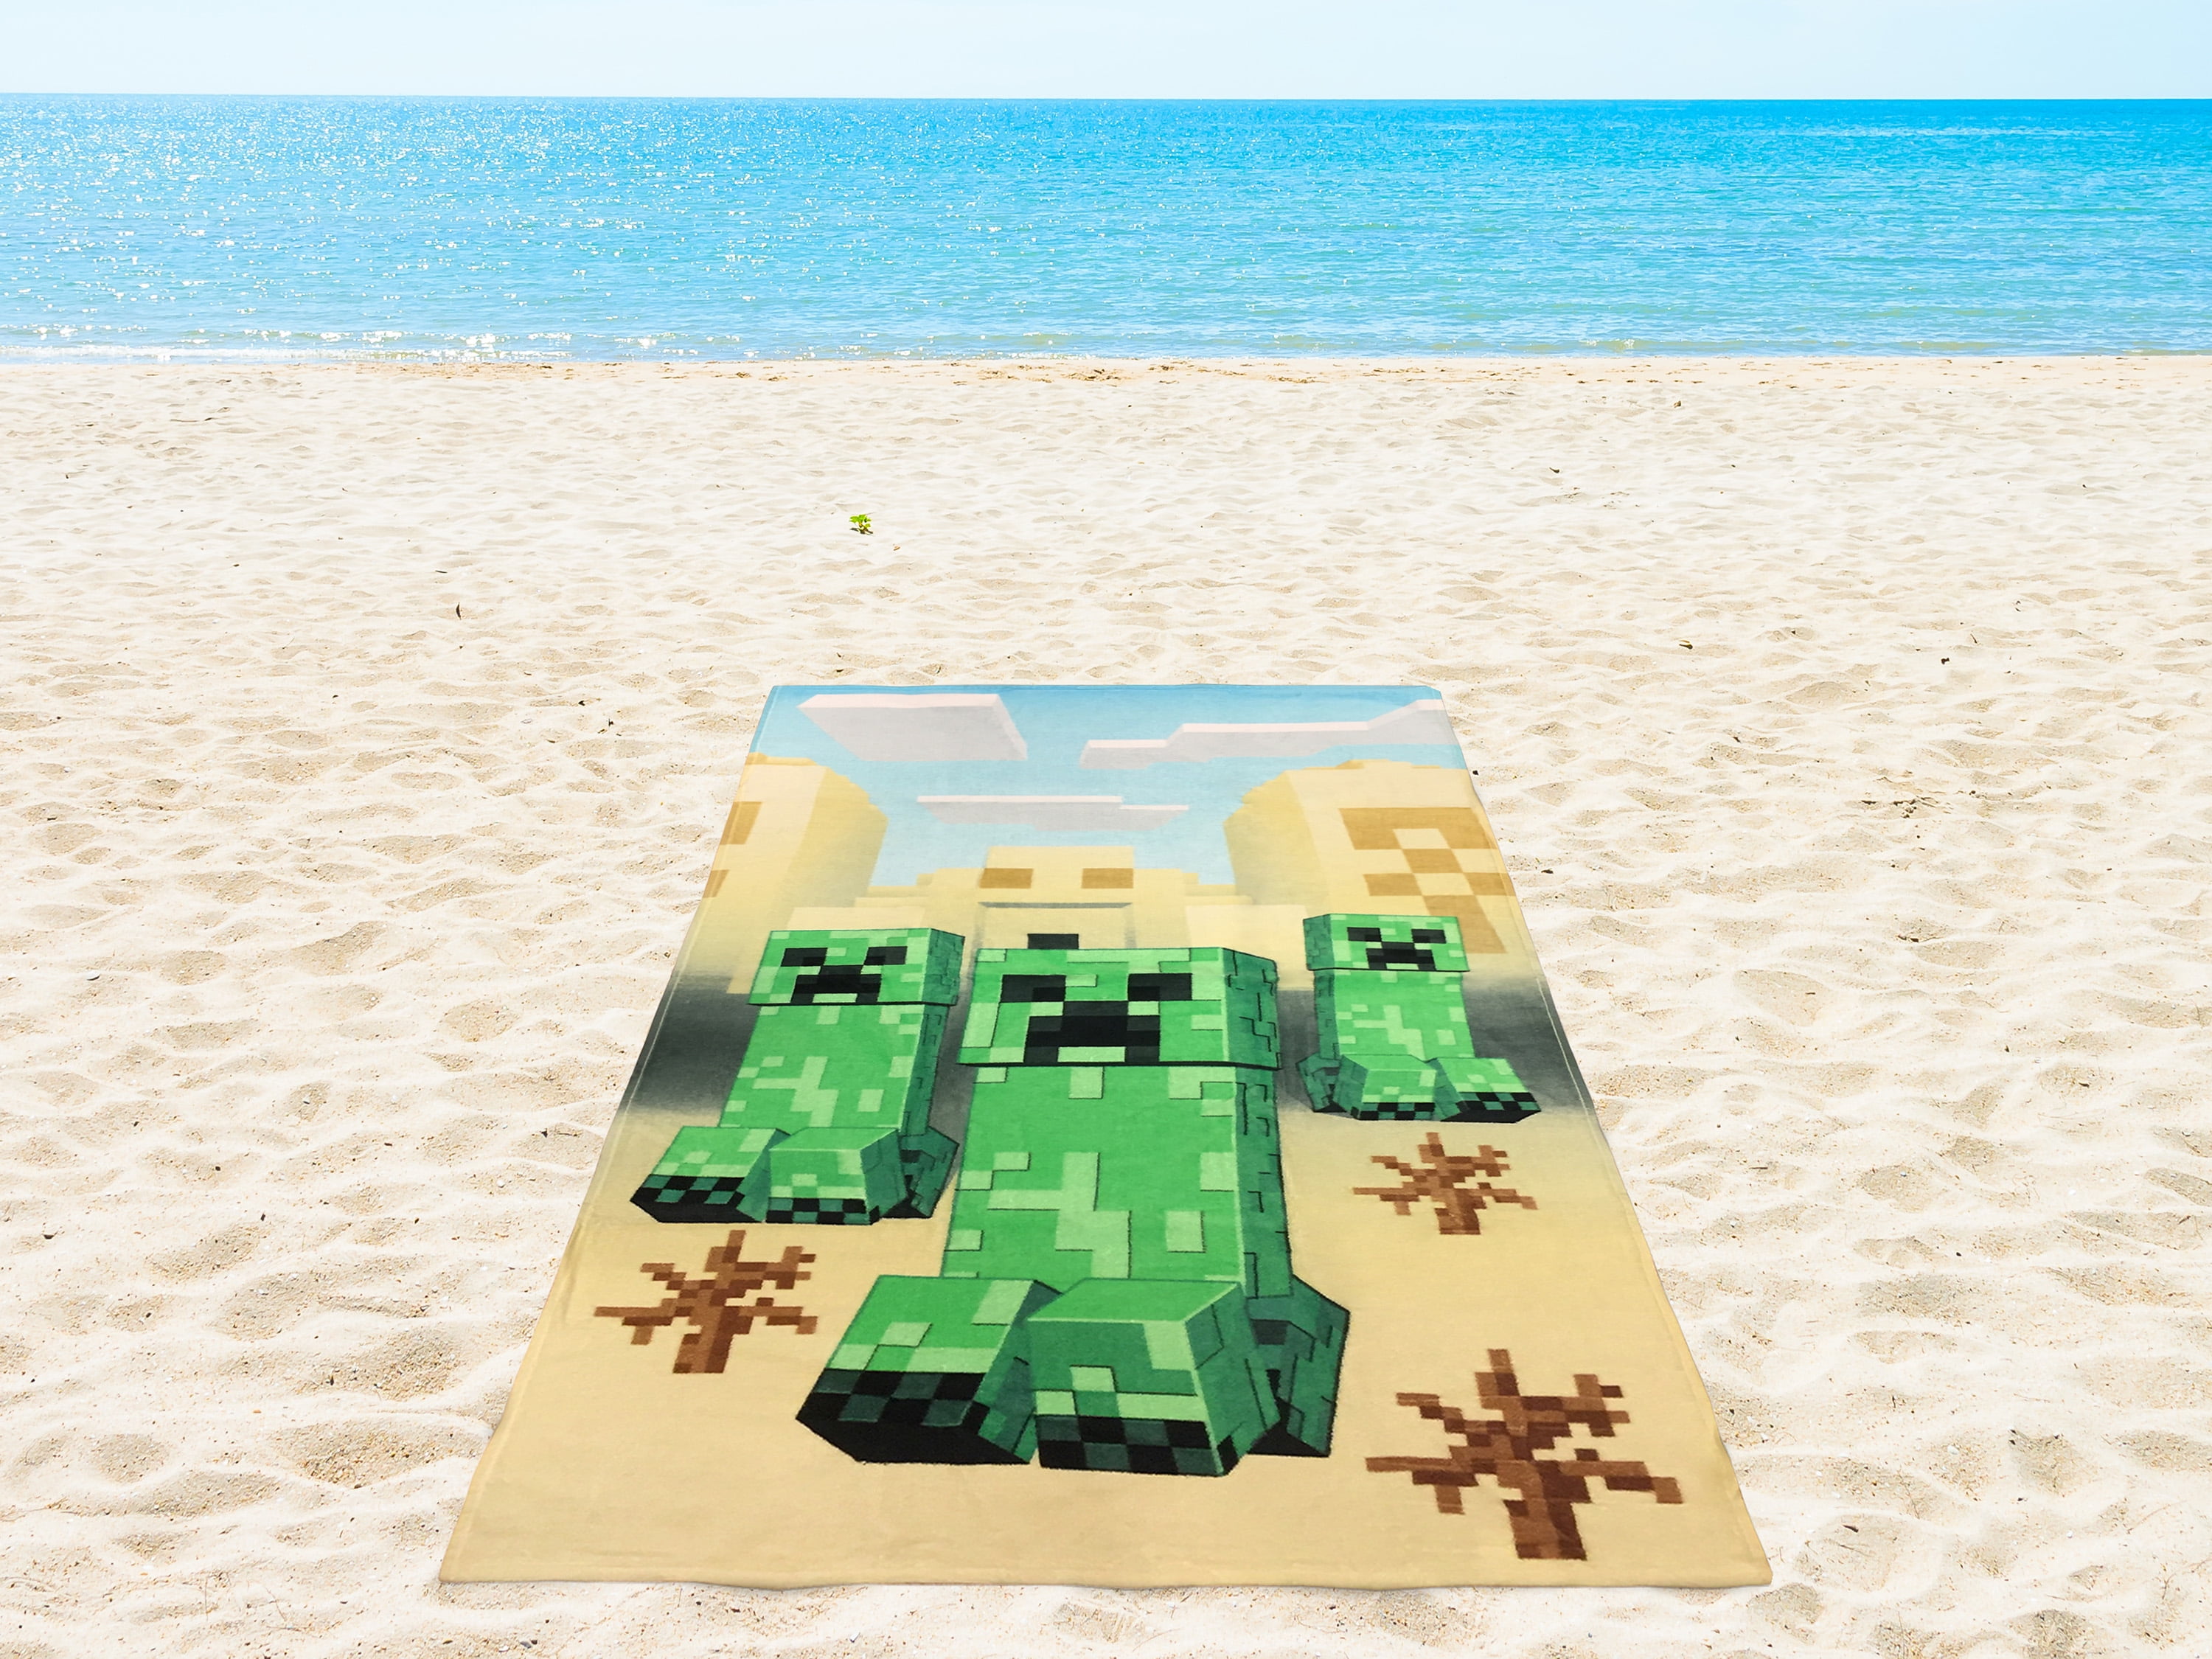 Minecraft Shipwreck Beach Towel Measures 28 X 58 Inches for sale online 